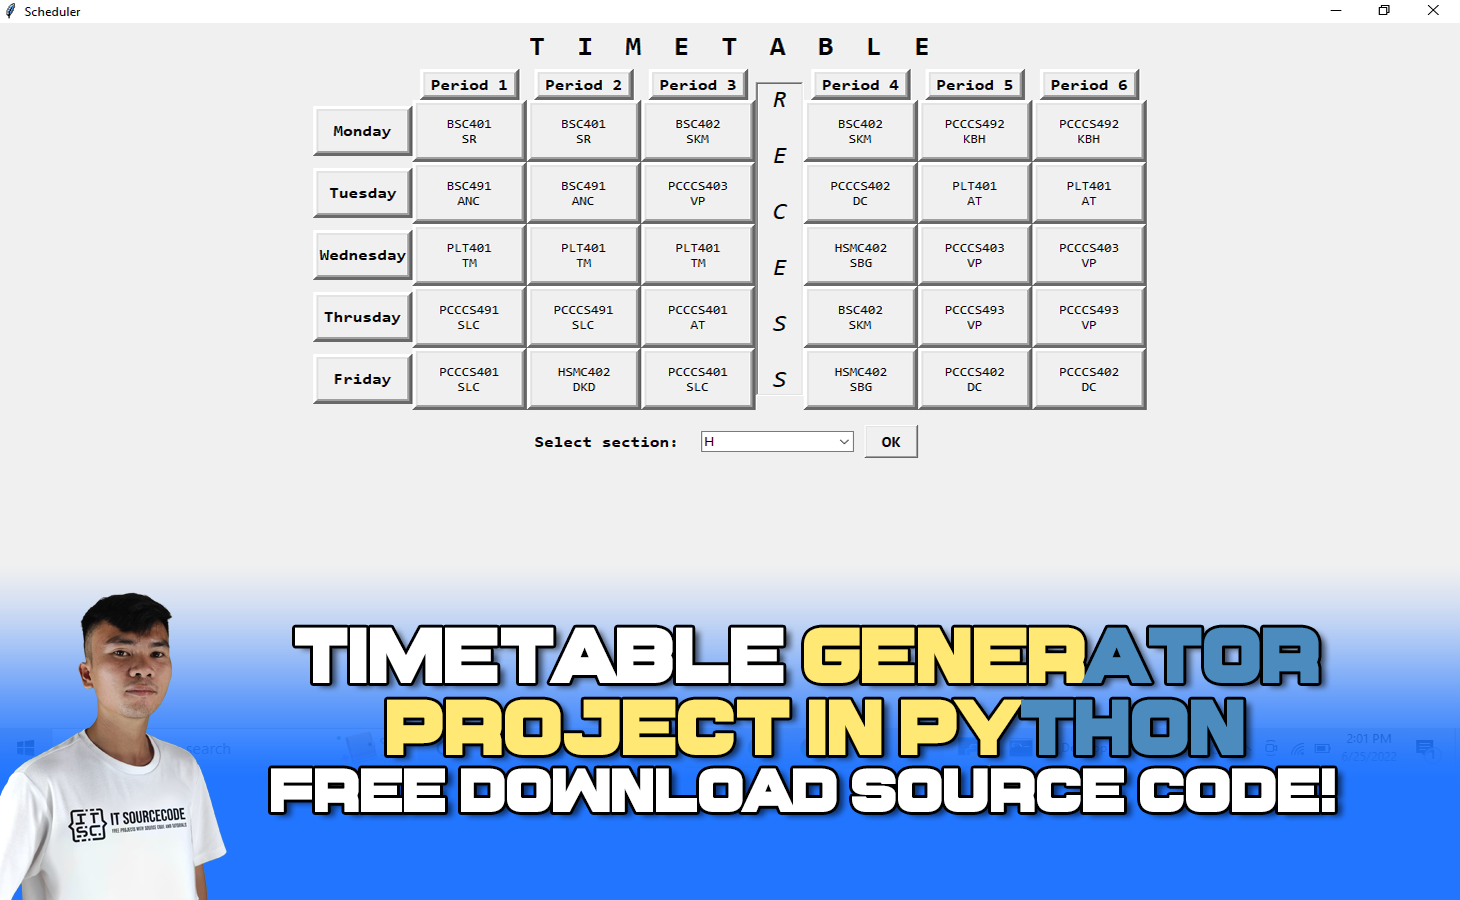 timetable-generator-project-in-python-with-source-code